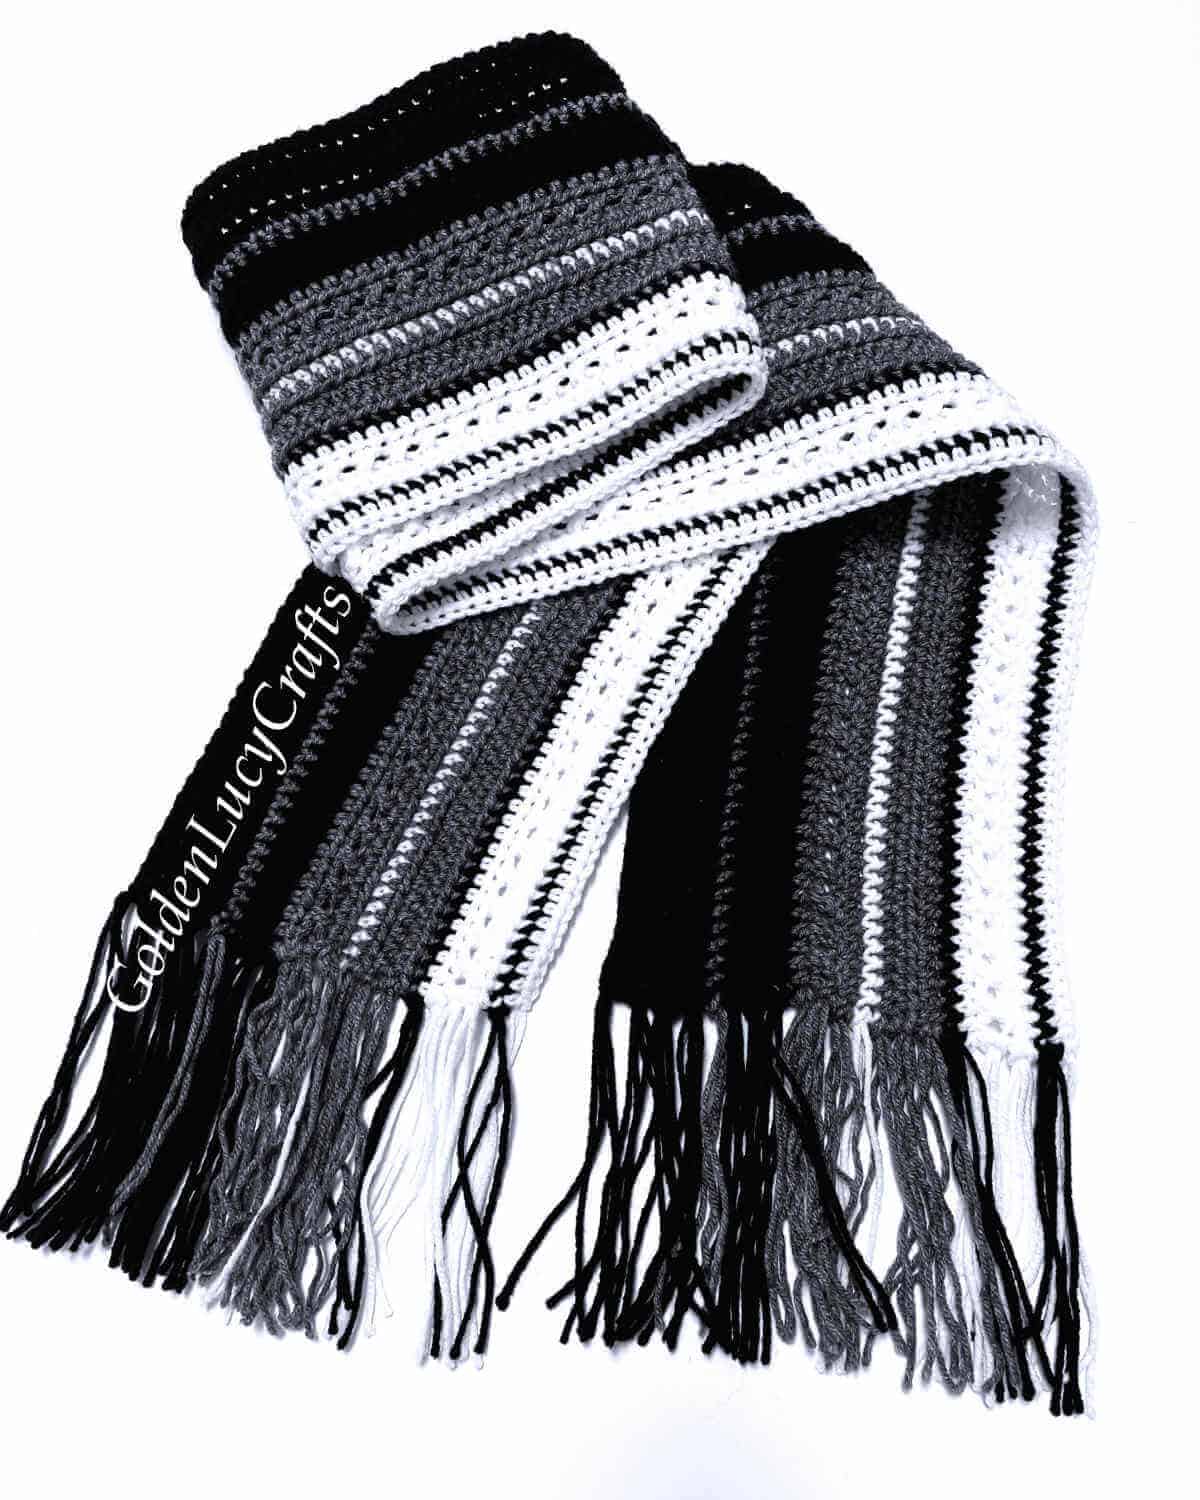 Crochet men's scarf in white, grey and black colors.